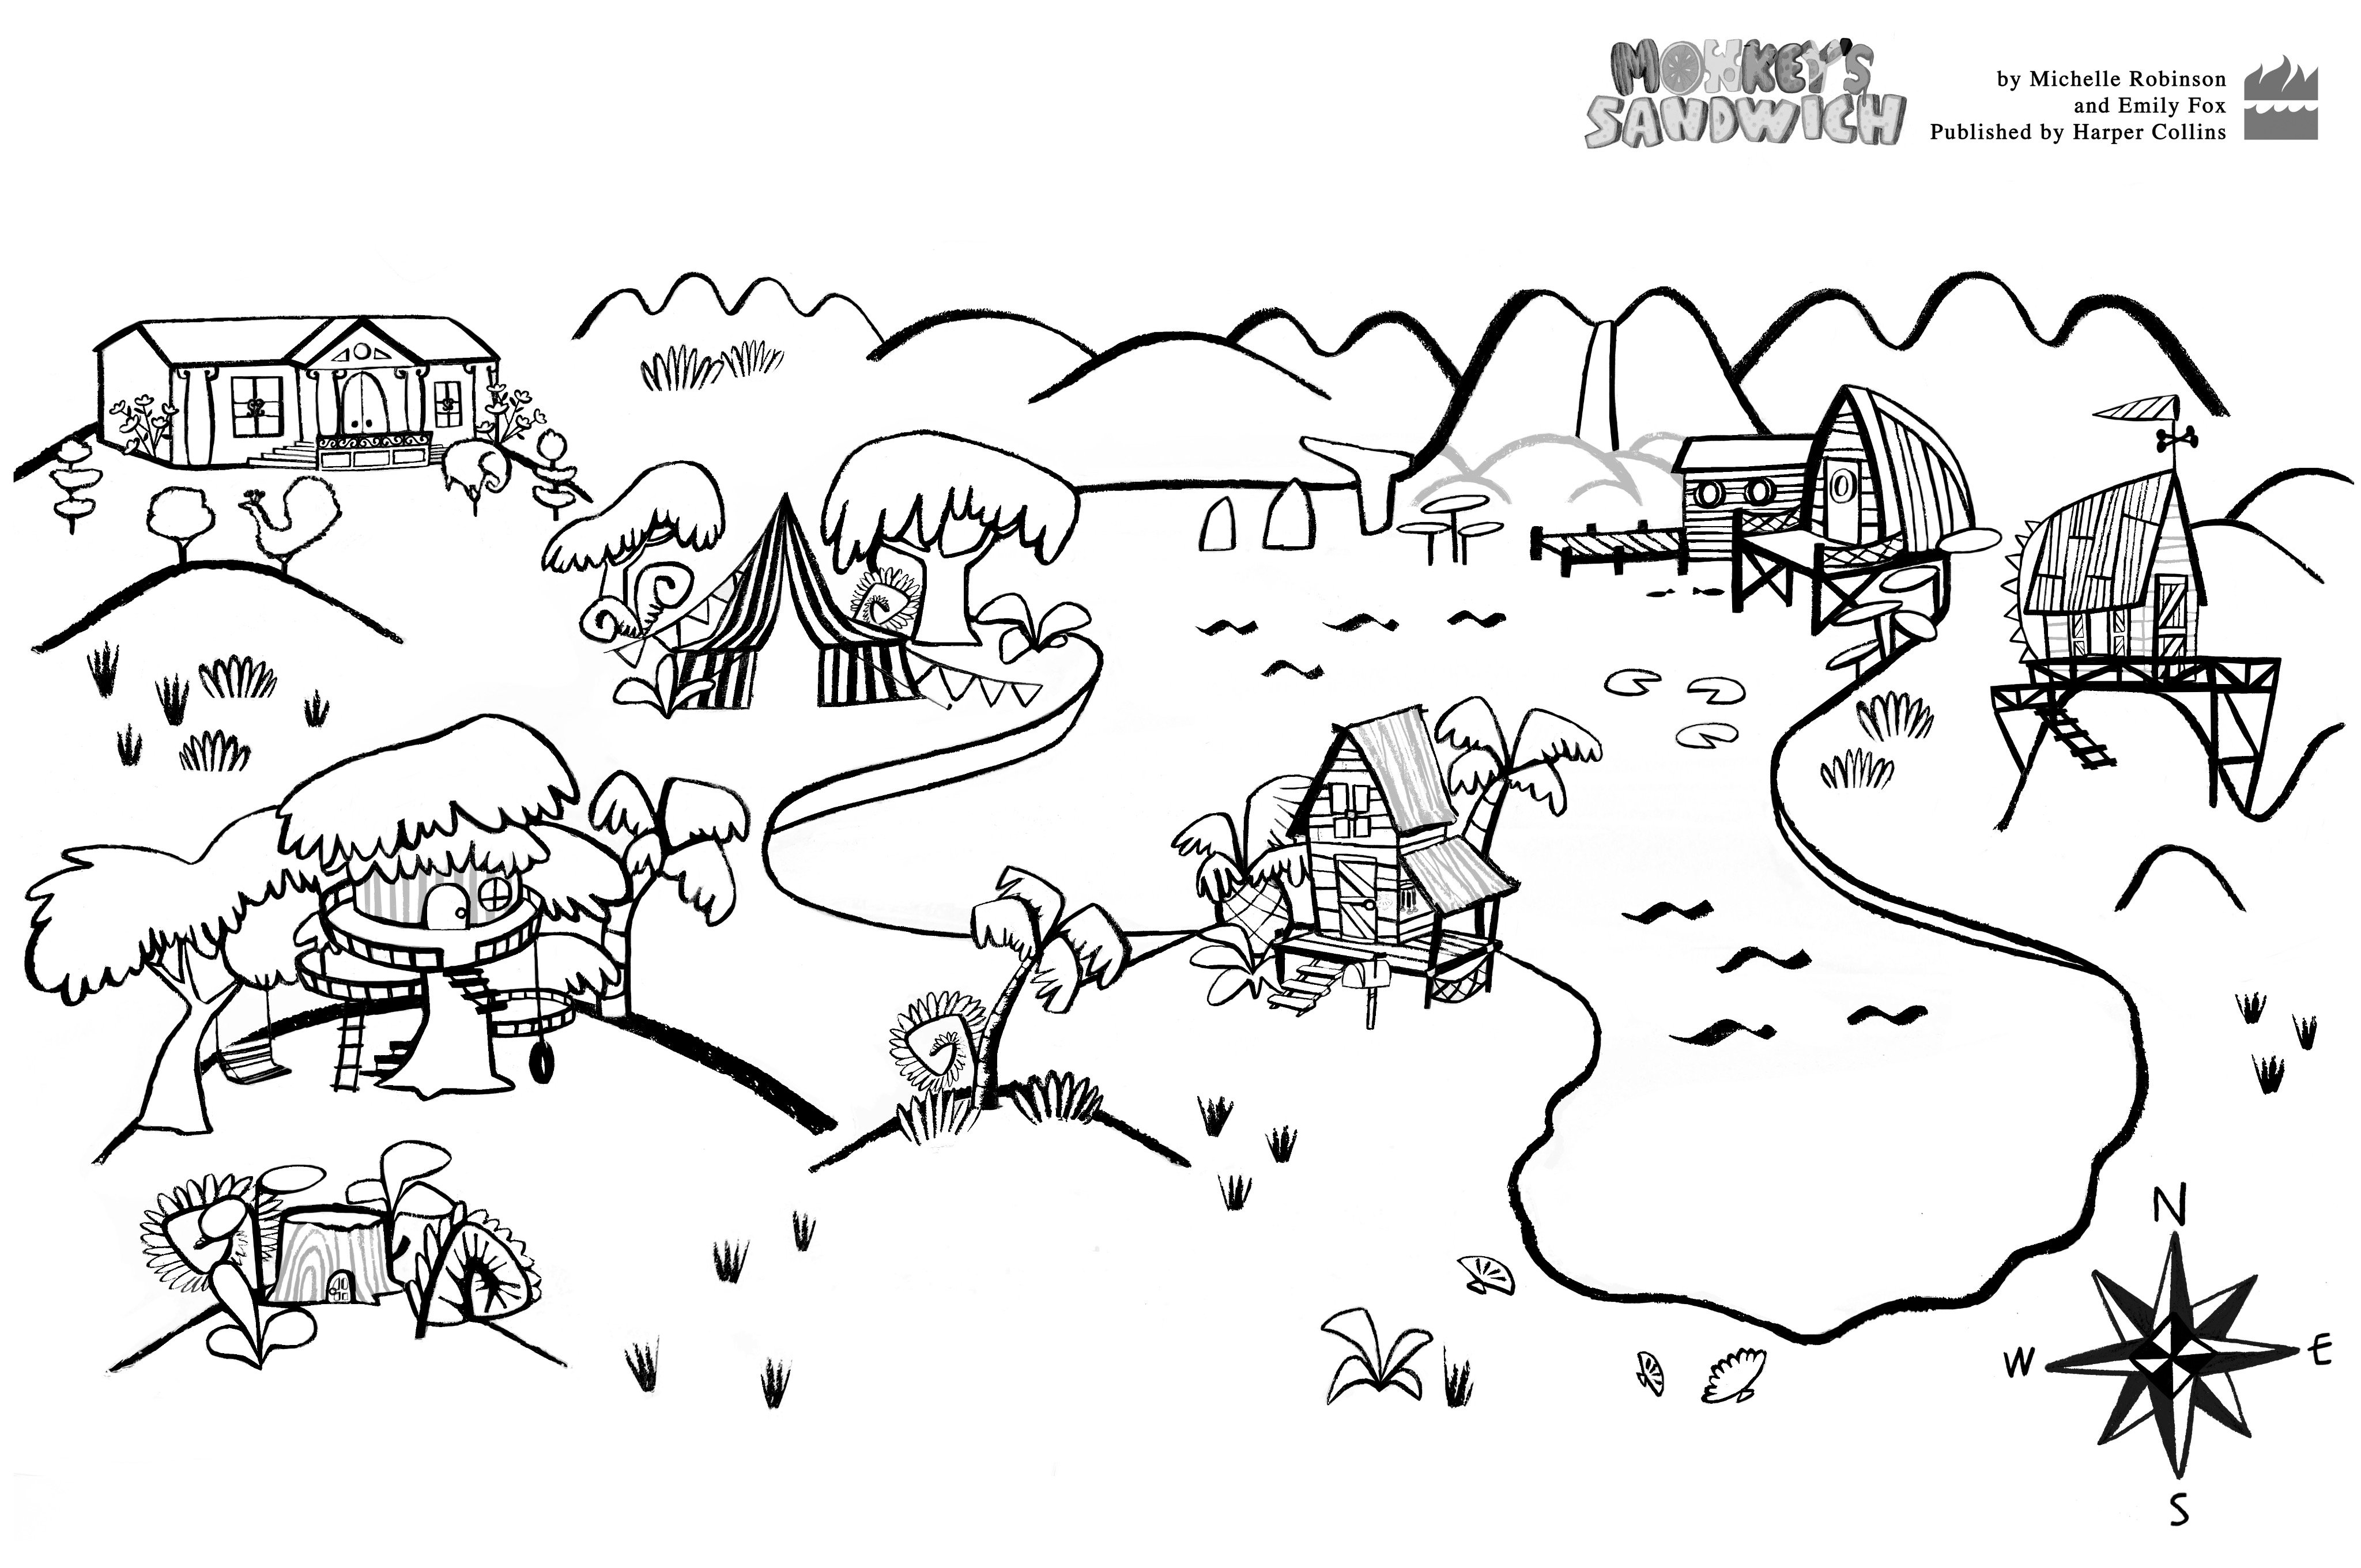 Colouring sheet for Monkey's Sandwich. featuring the map of character's houses from the book.